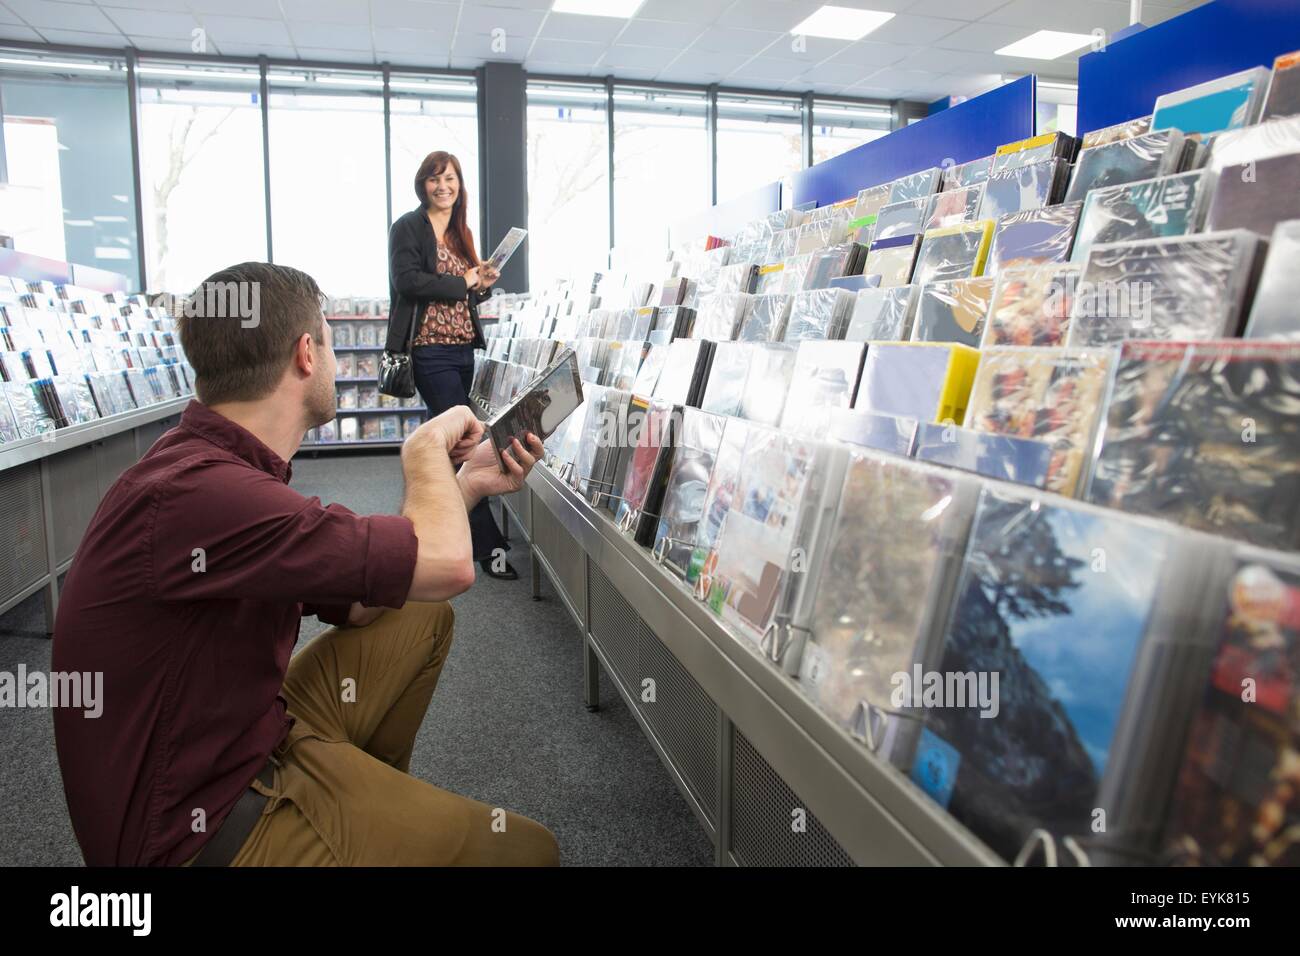 Couple shopping for DVDs in electronics store Stock Photo